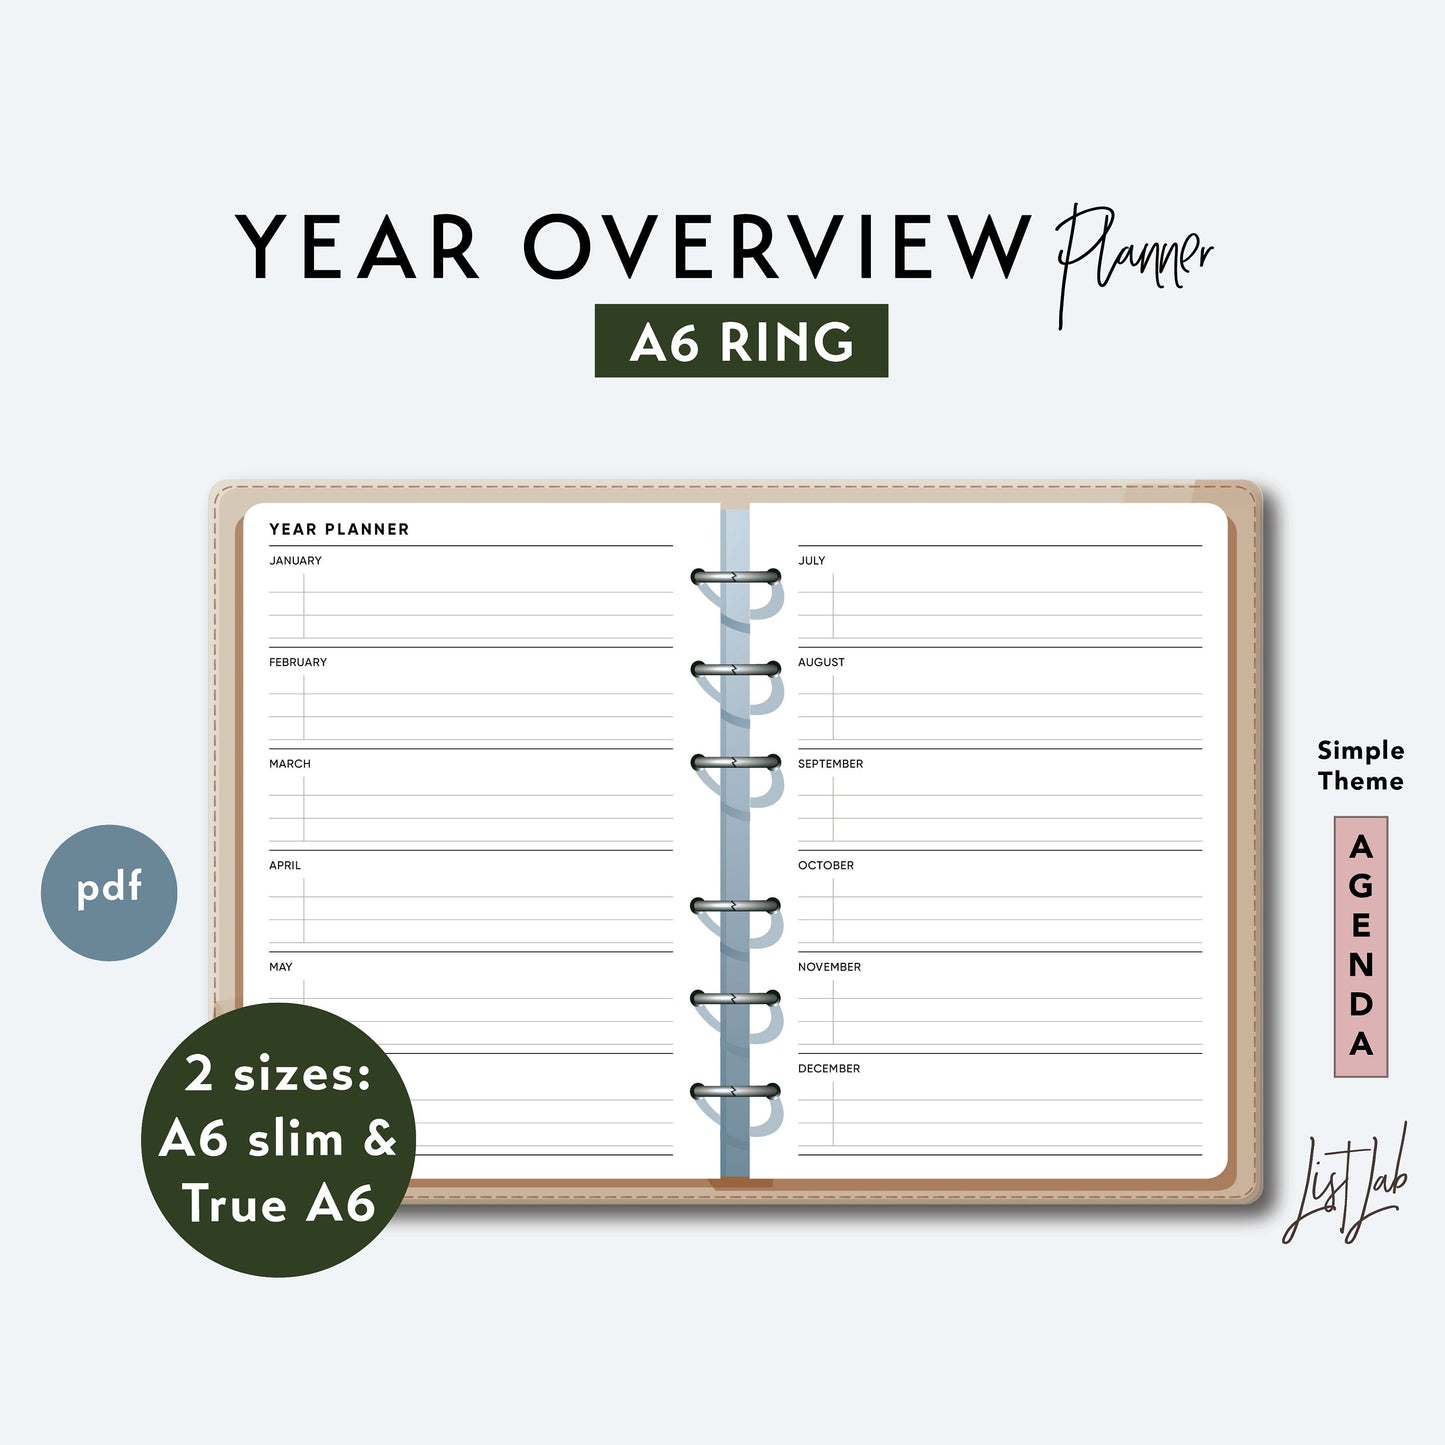 A6 Ring YEAR OVERVIEW PLANNER Printable Set